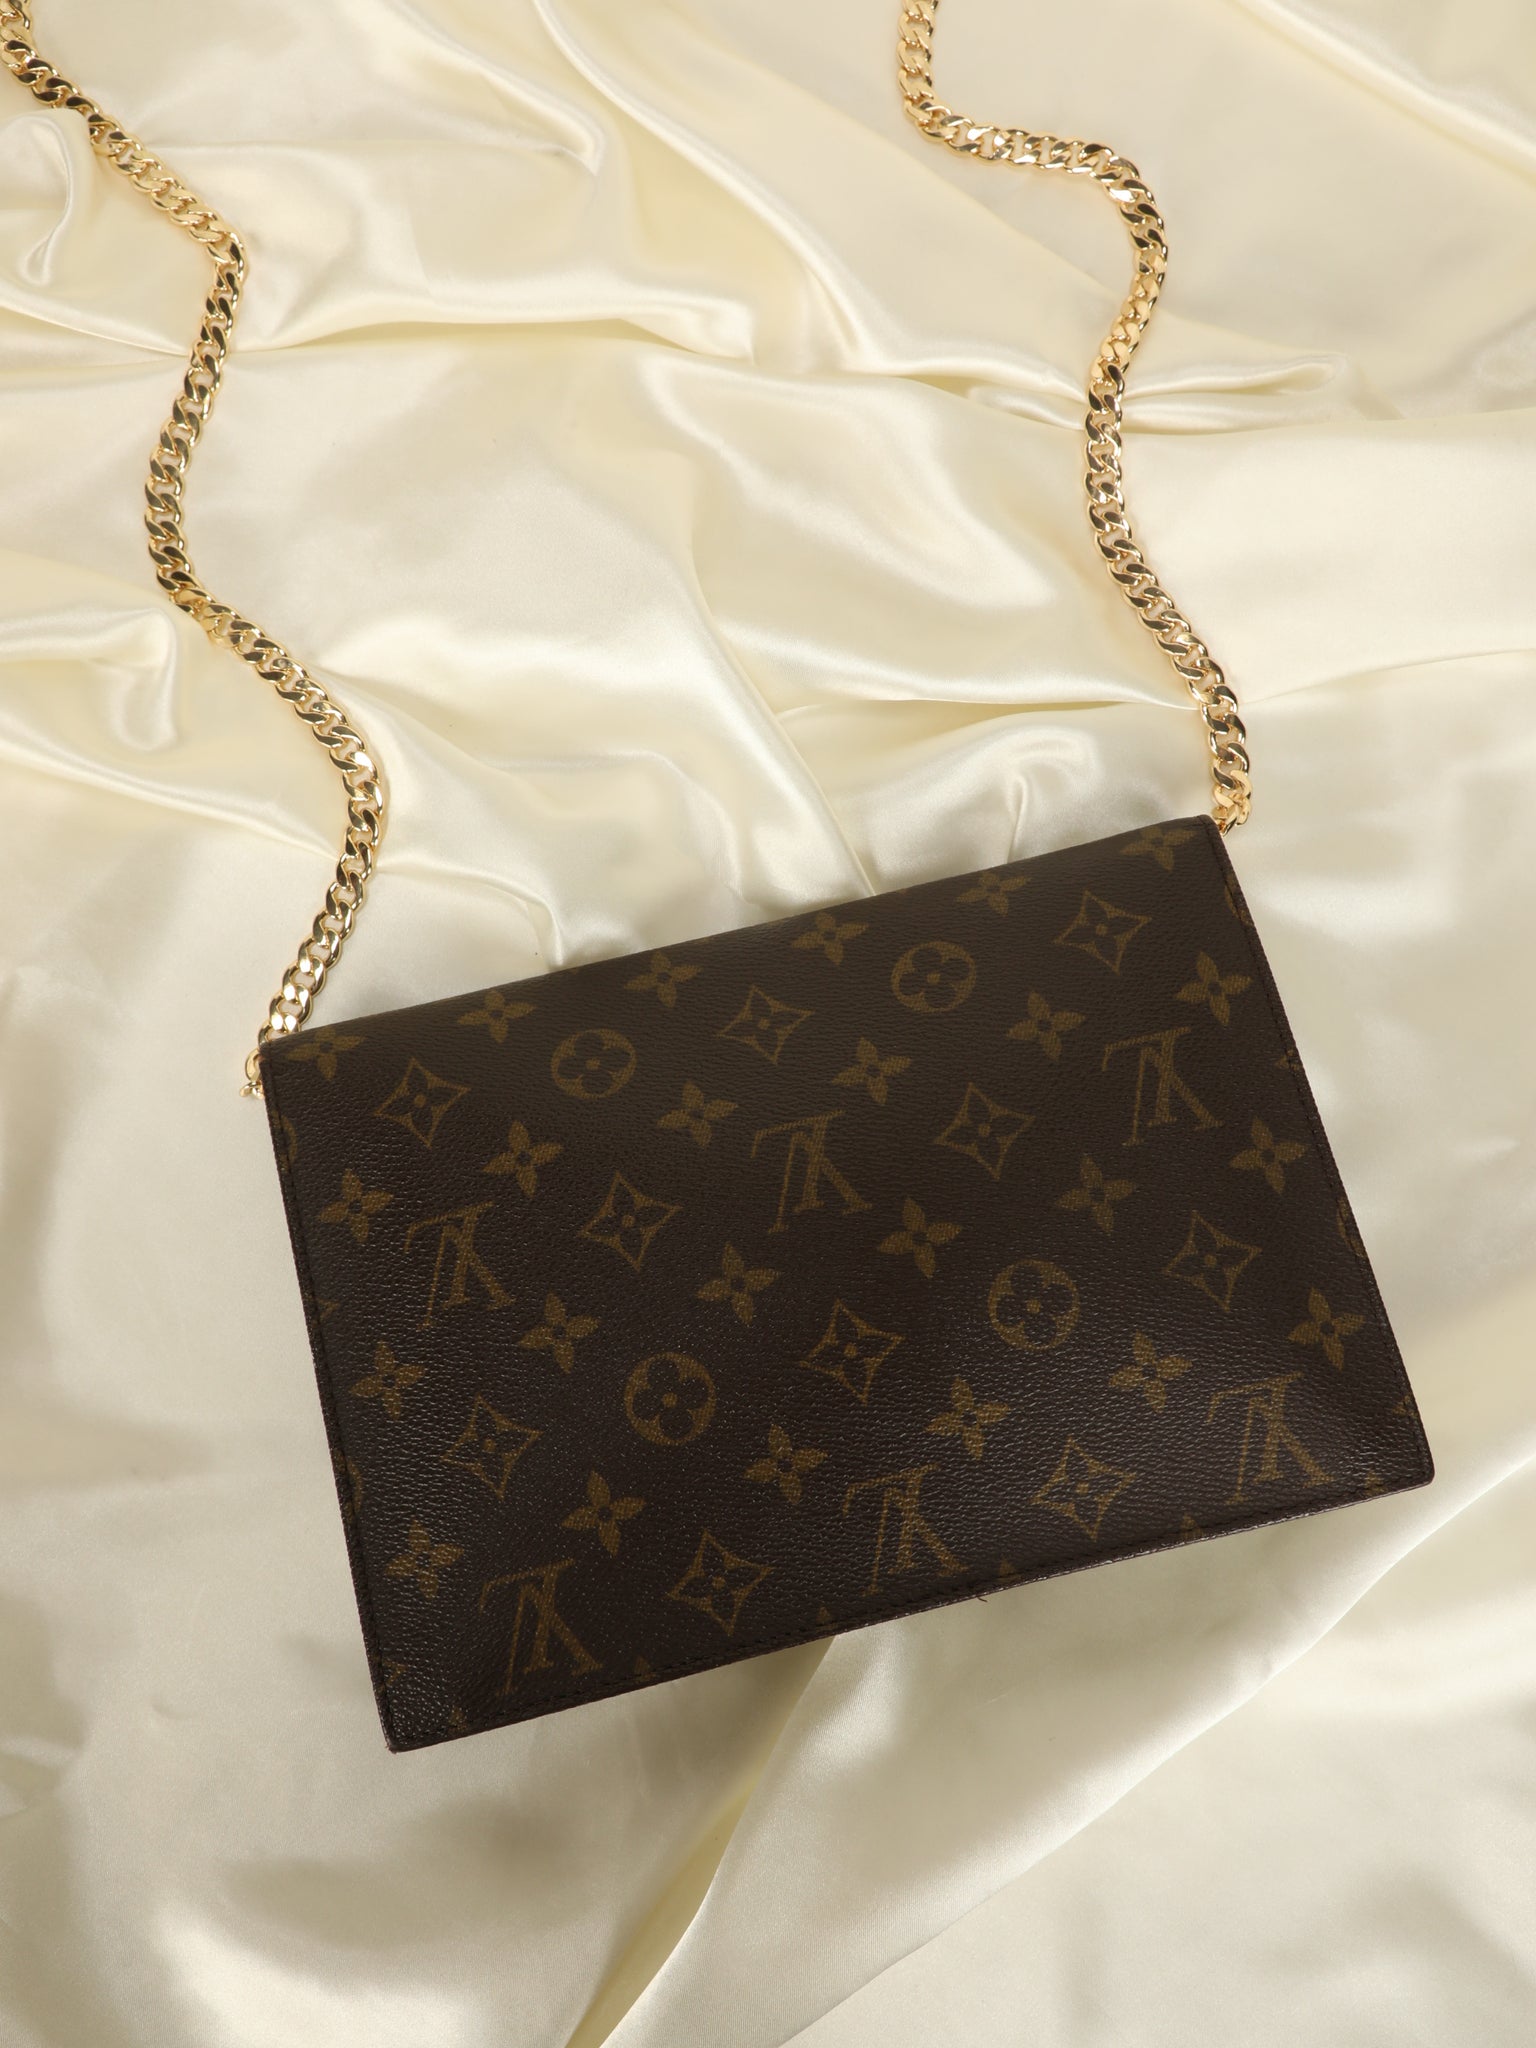 lv clutch with gold chain